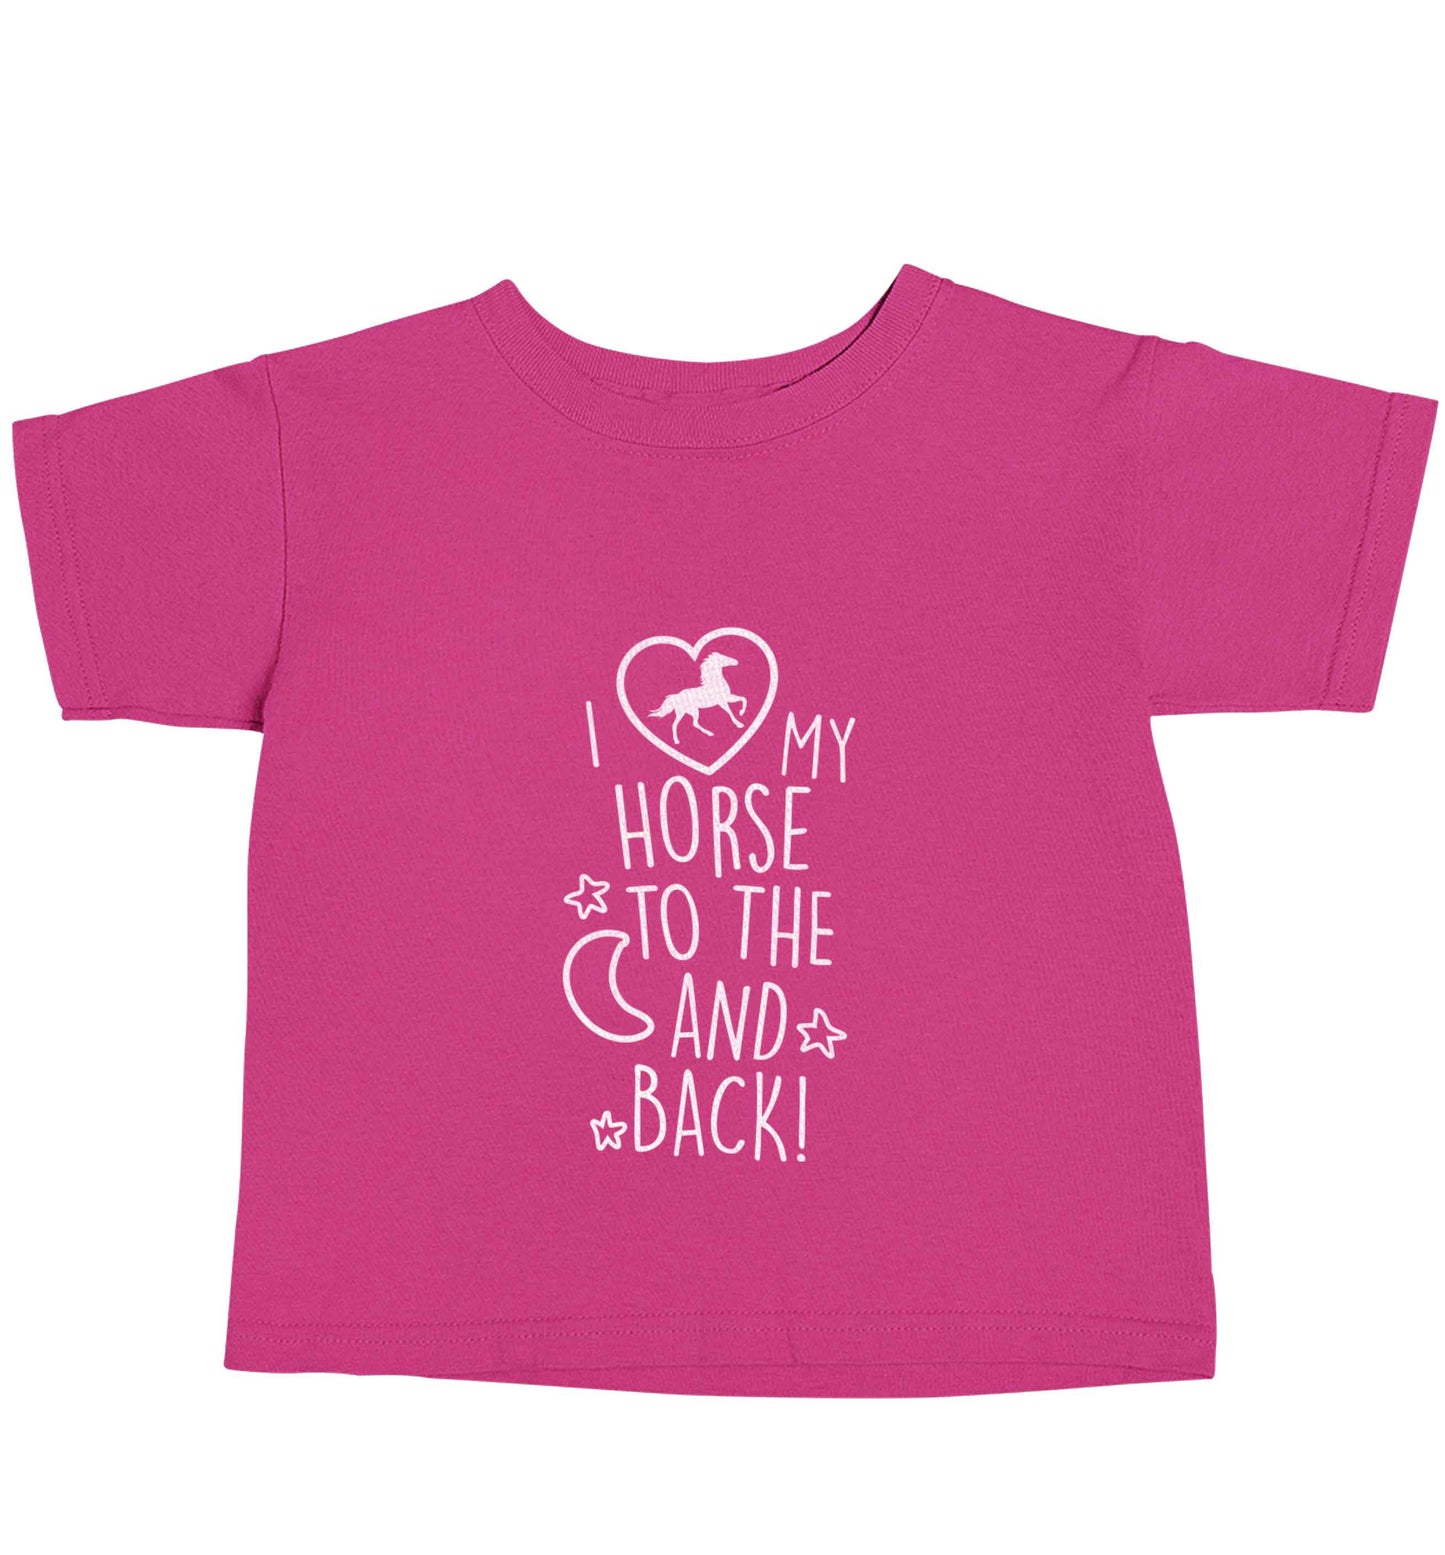 I love my horse to the moon and back pink baby toddler Tshirt 2 Years